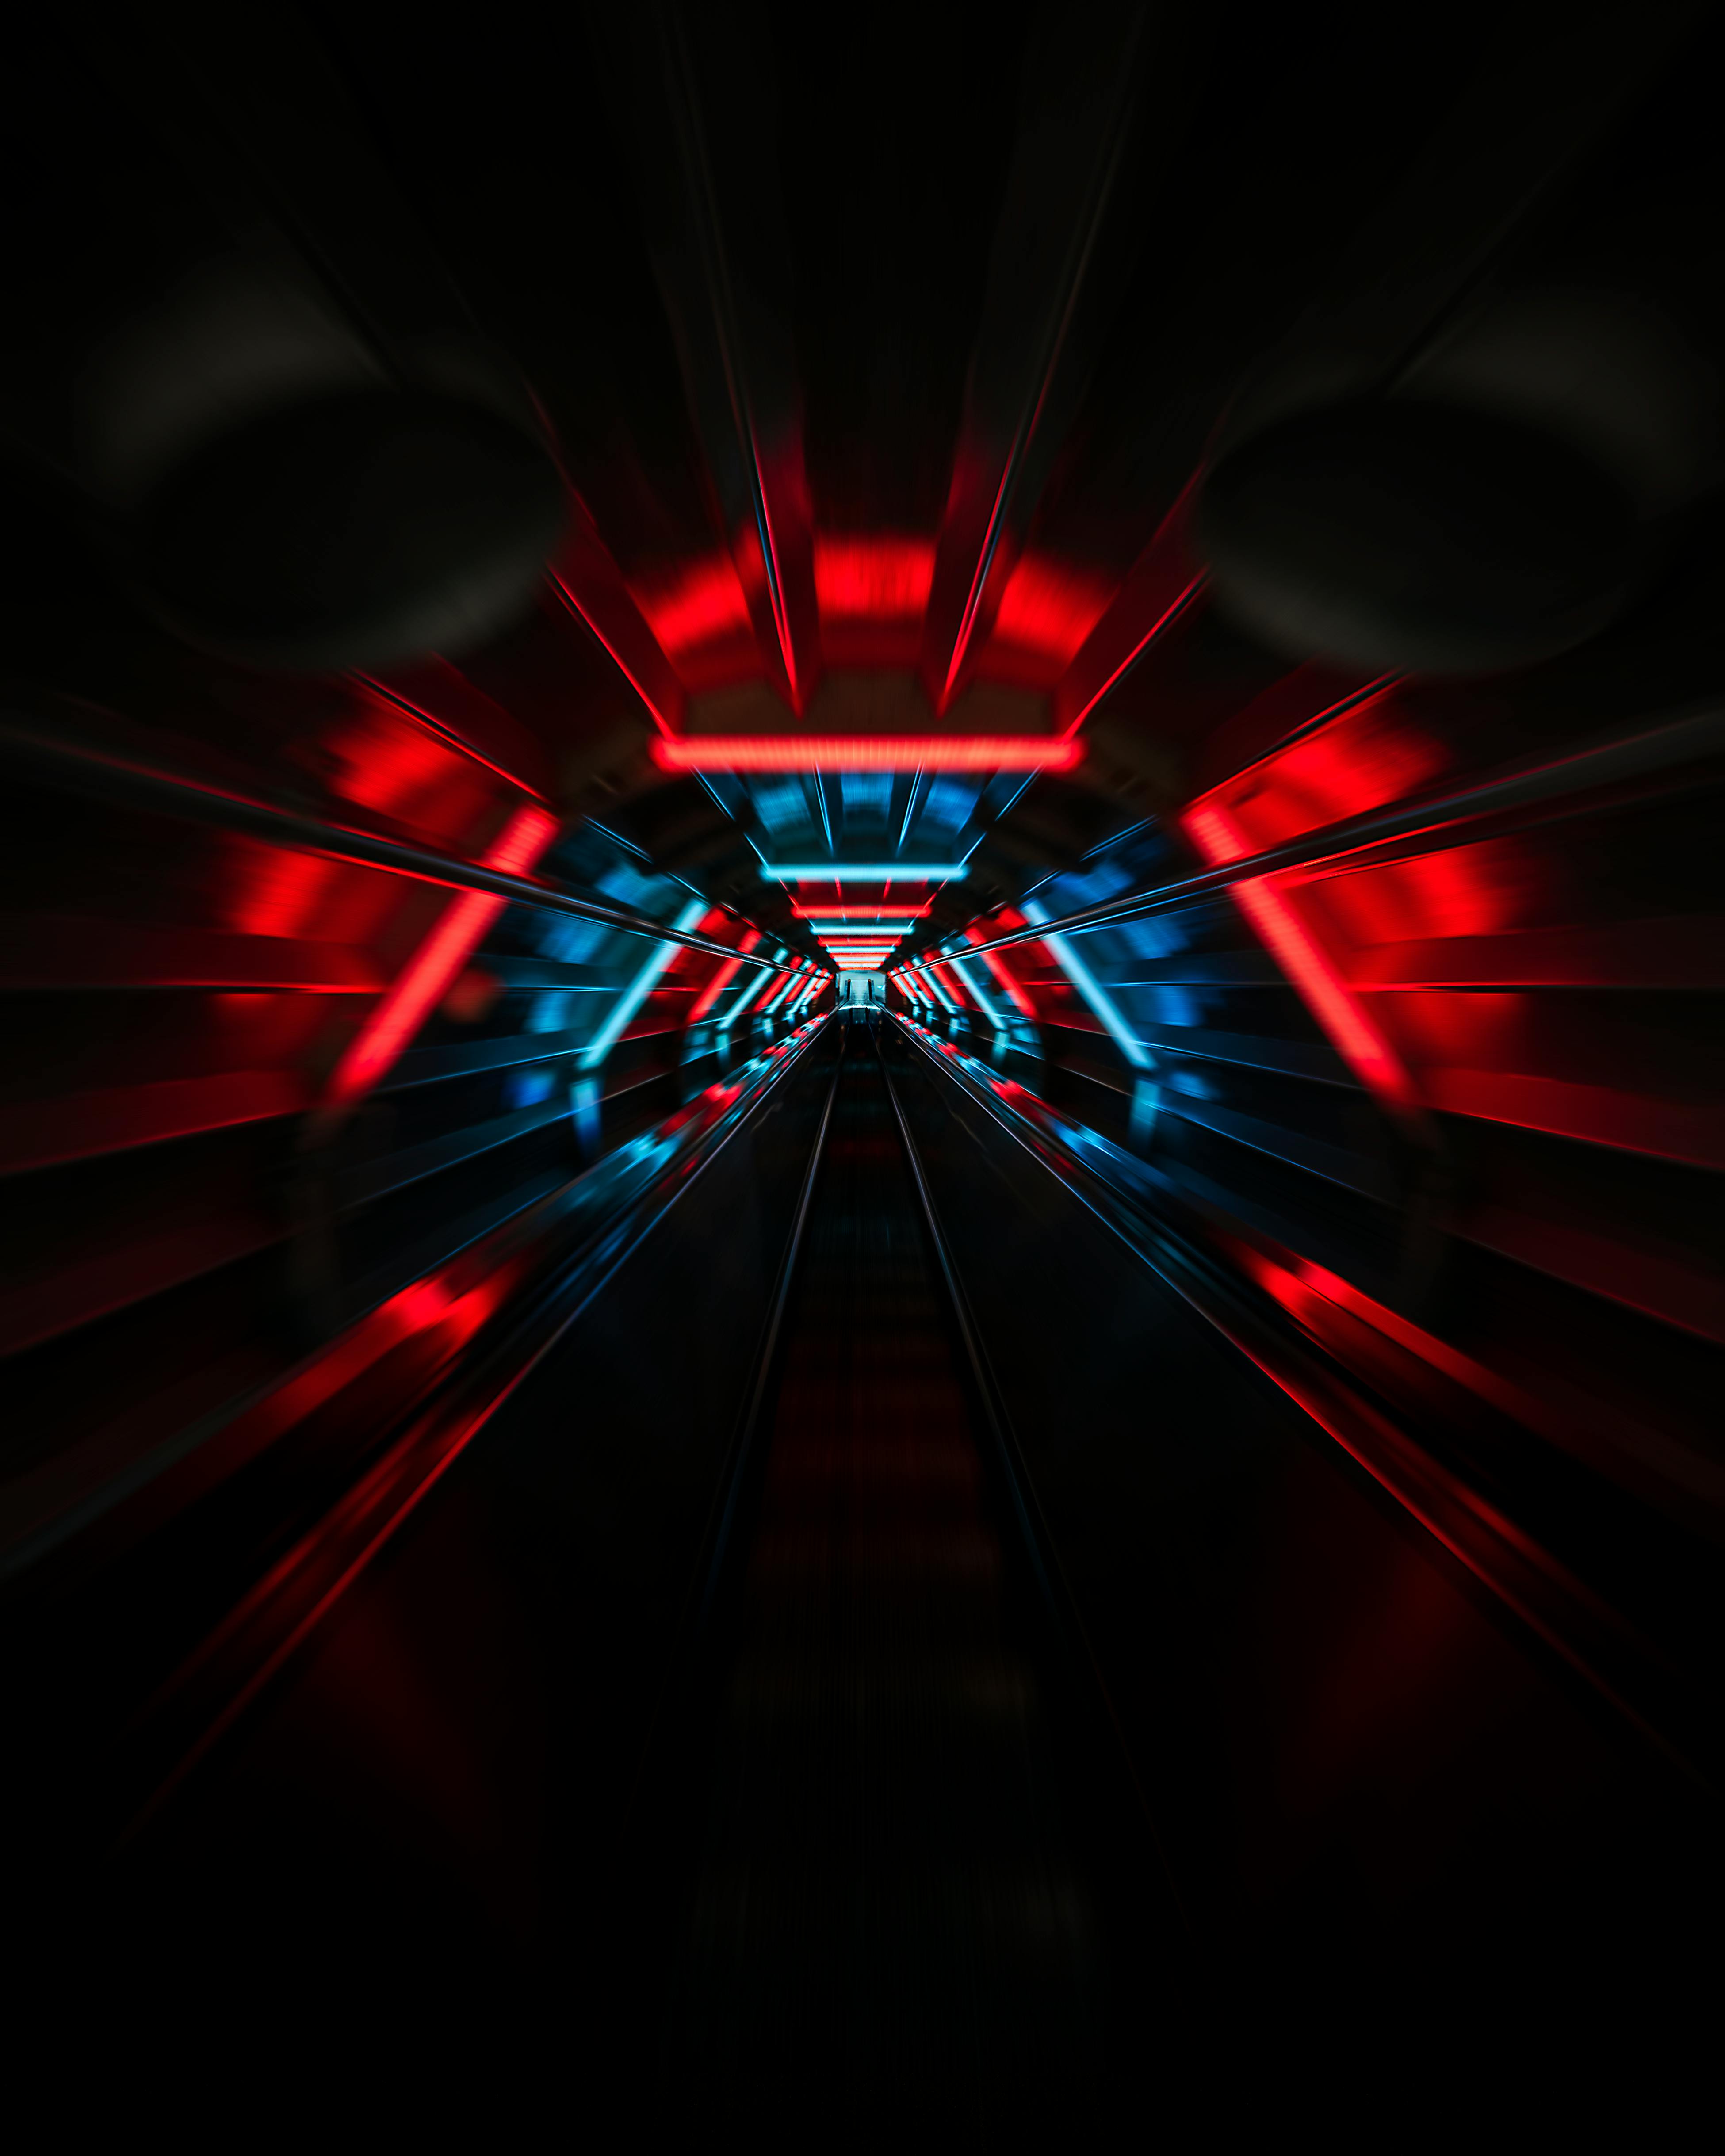 dark urban tunnel with red and blue neon lights